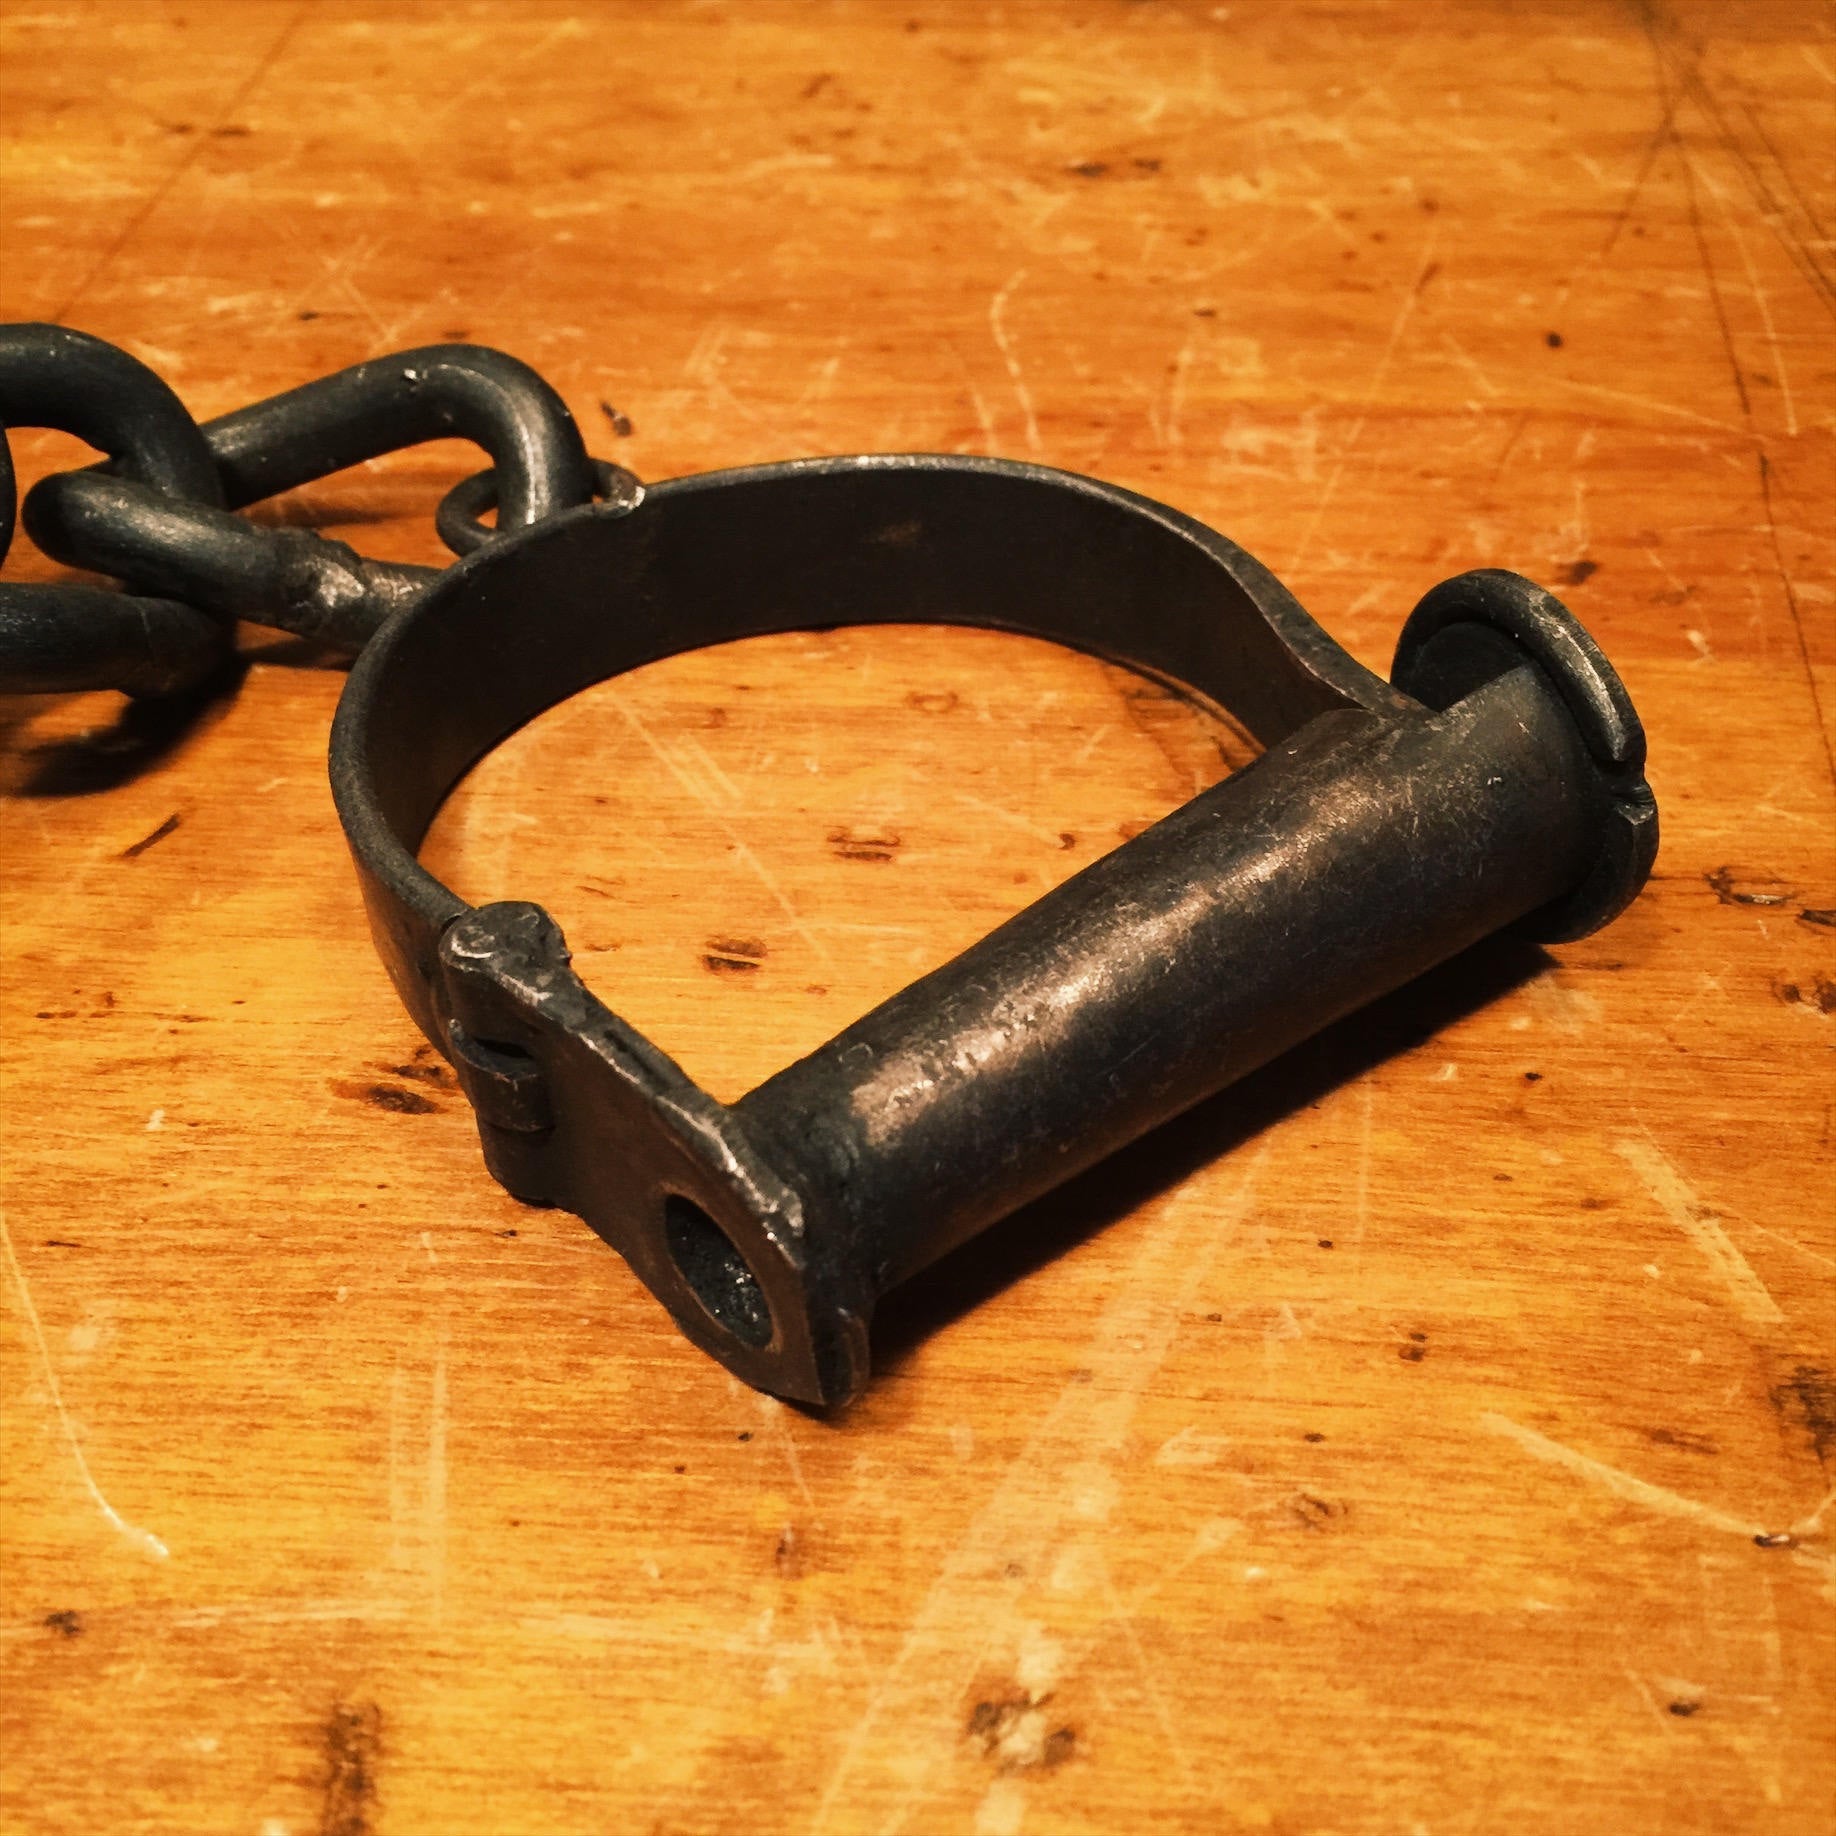 Antique Sheriff Handcuffs with Unusual Chain Size - Cast Iron Shackles - 1800s Forged Metal - Missing Key - Police Collectibles -Military?